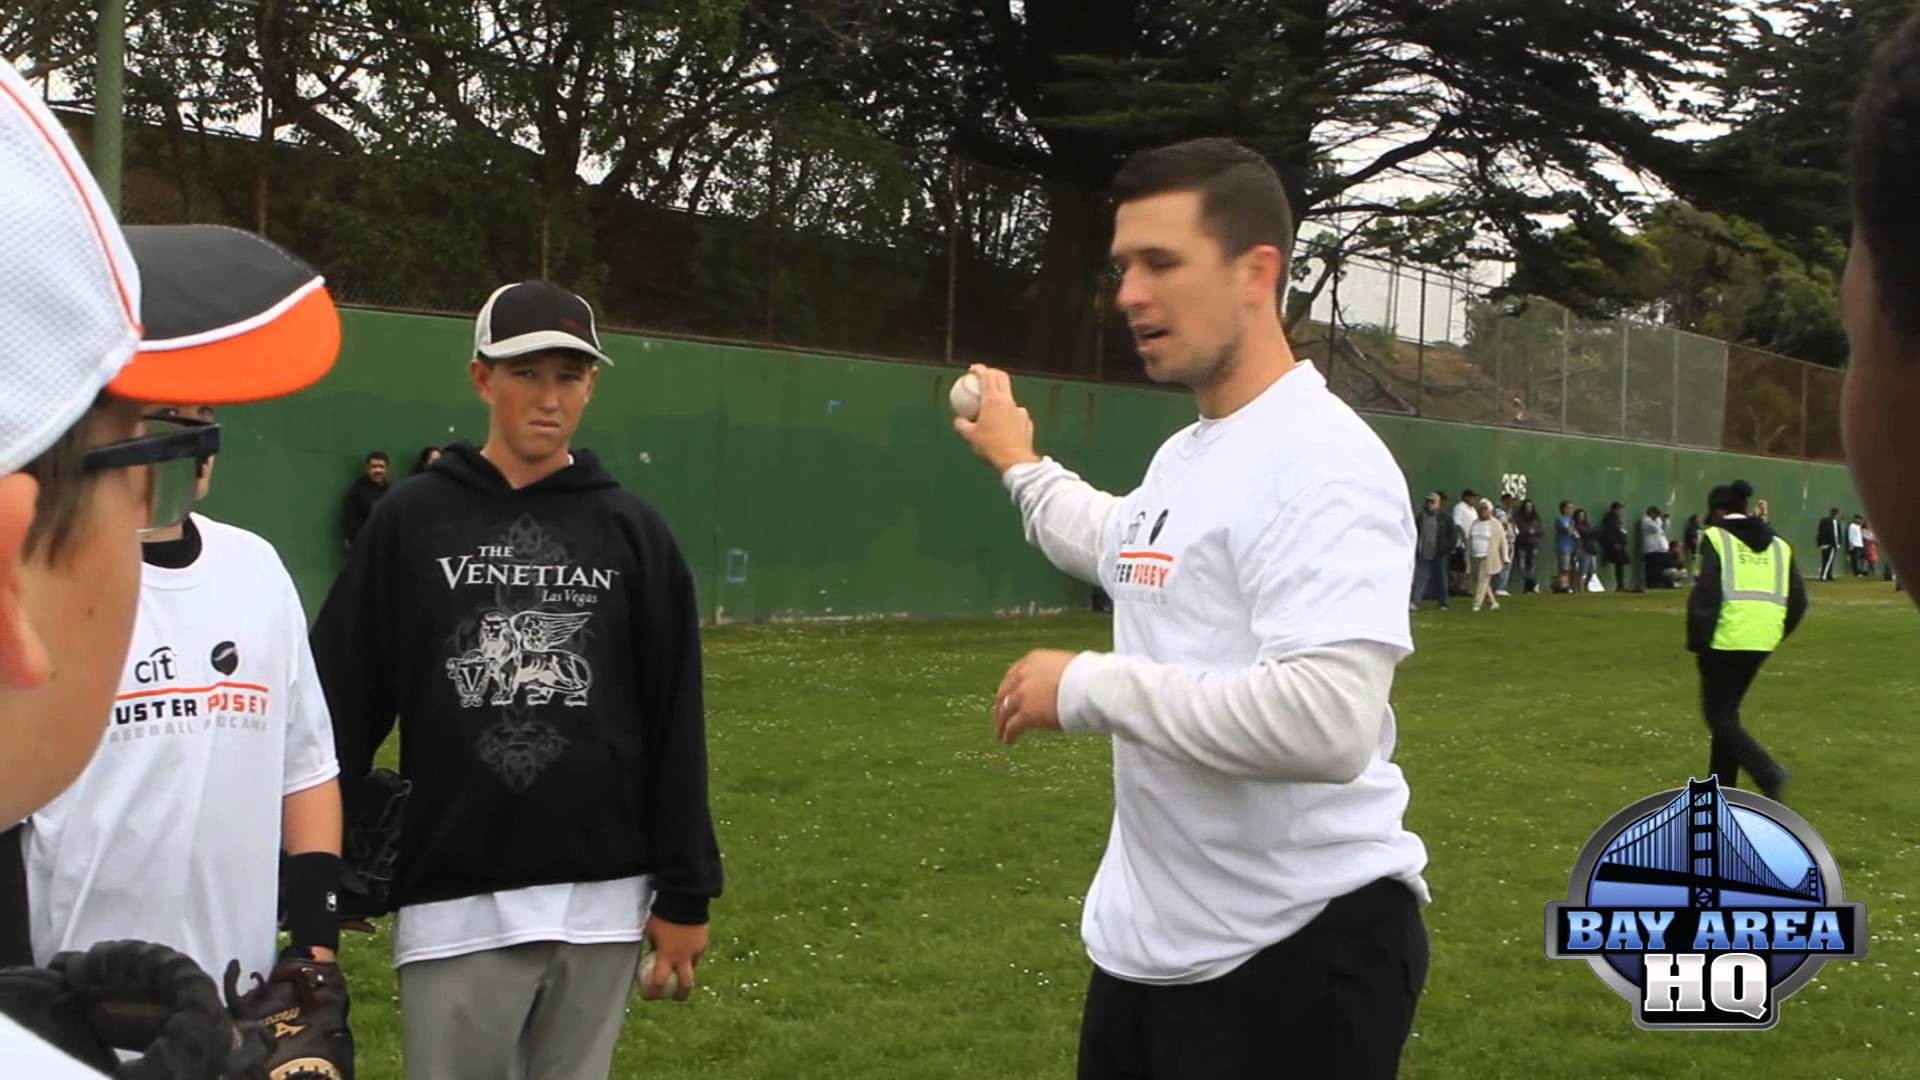 Beginner Youth Baseball Tips from Buster Posey, San Francisco Giants at  ProCamps! – YouTube